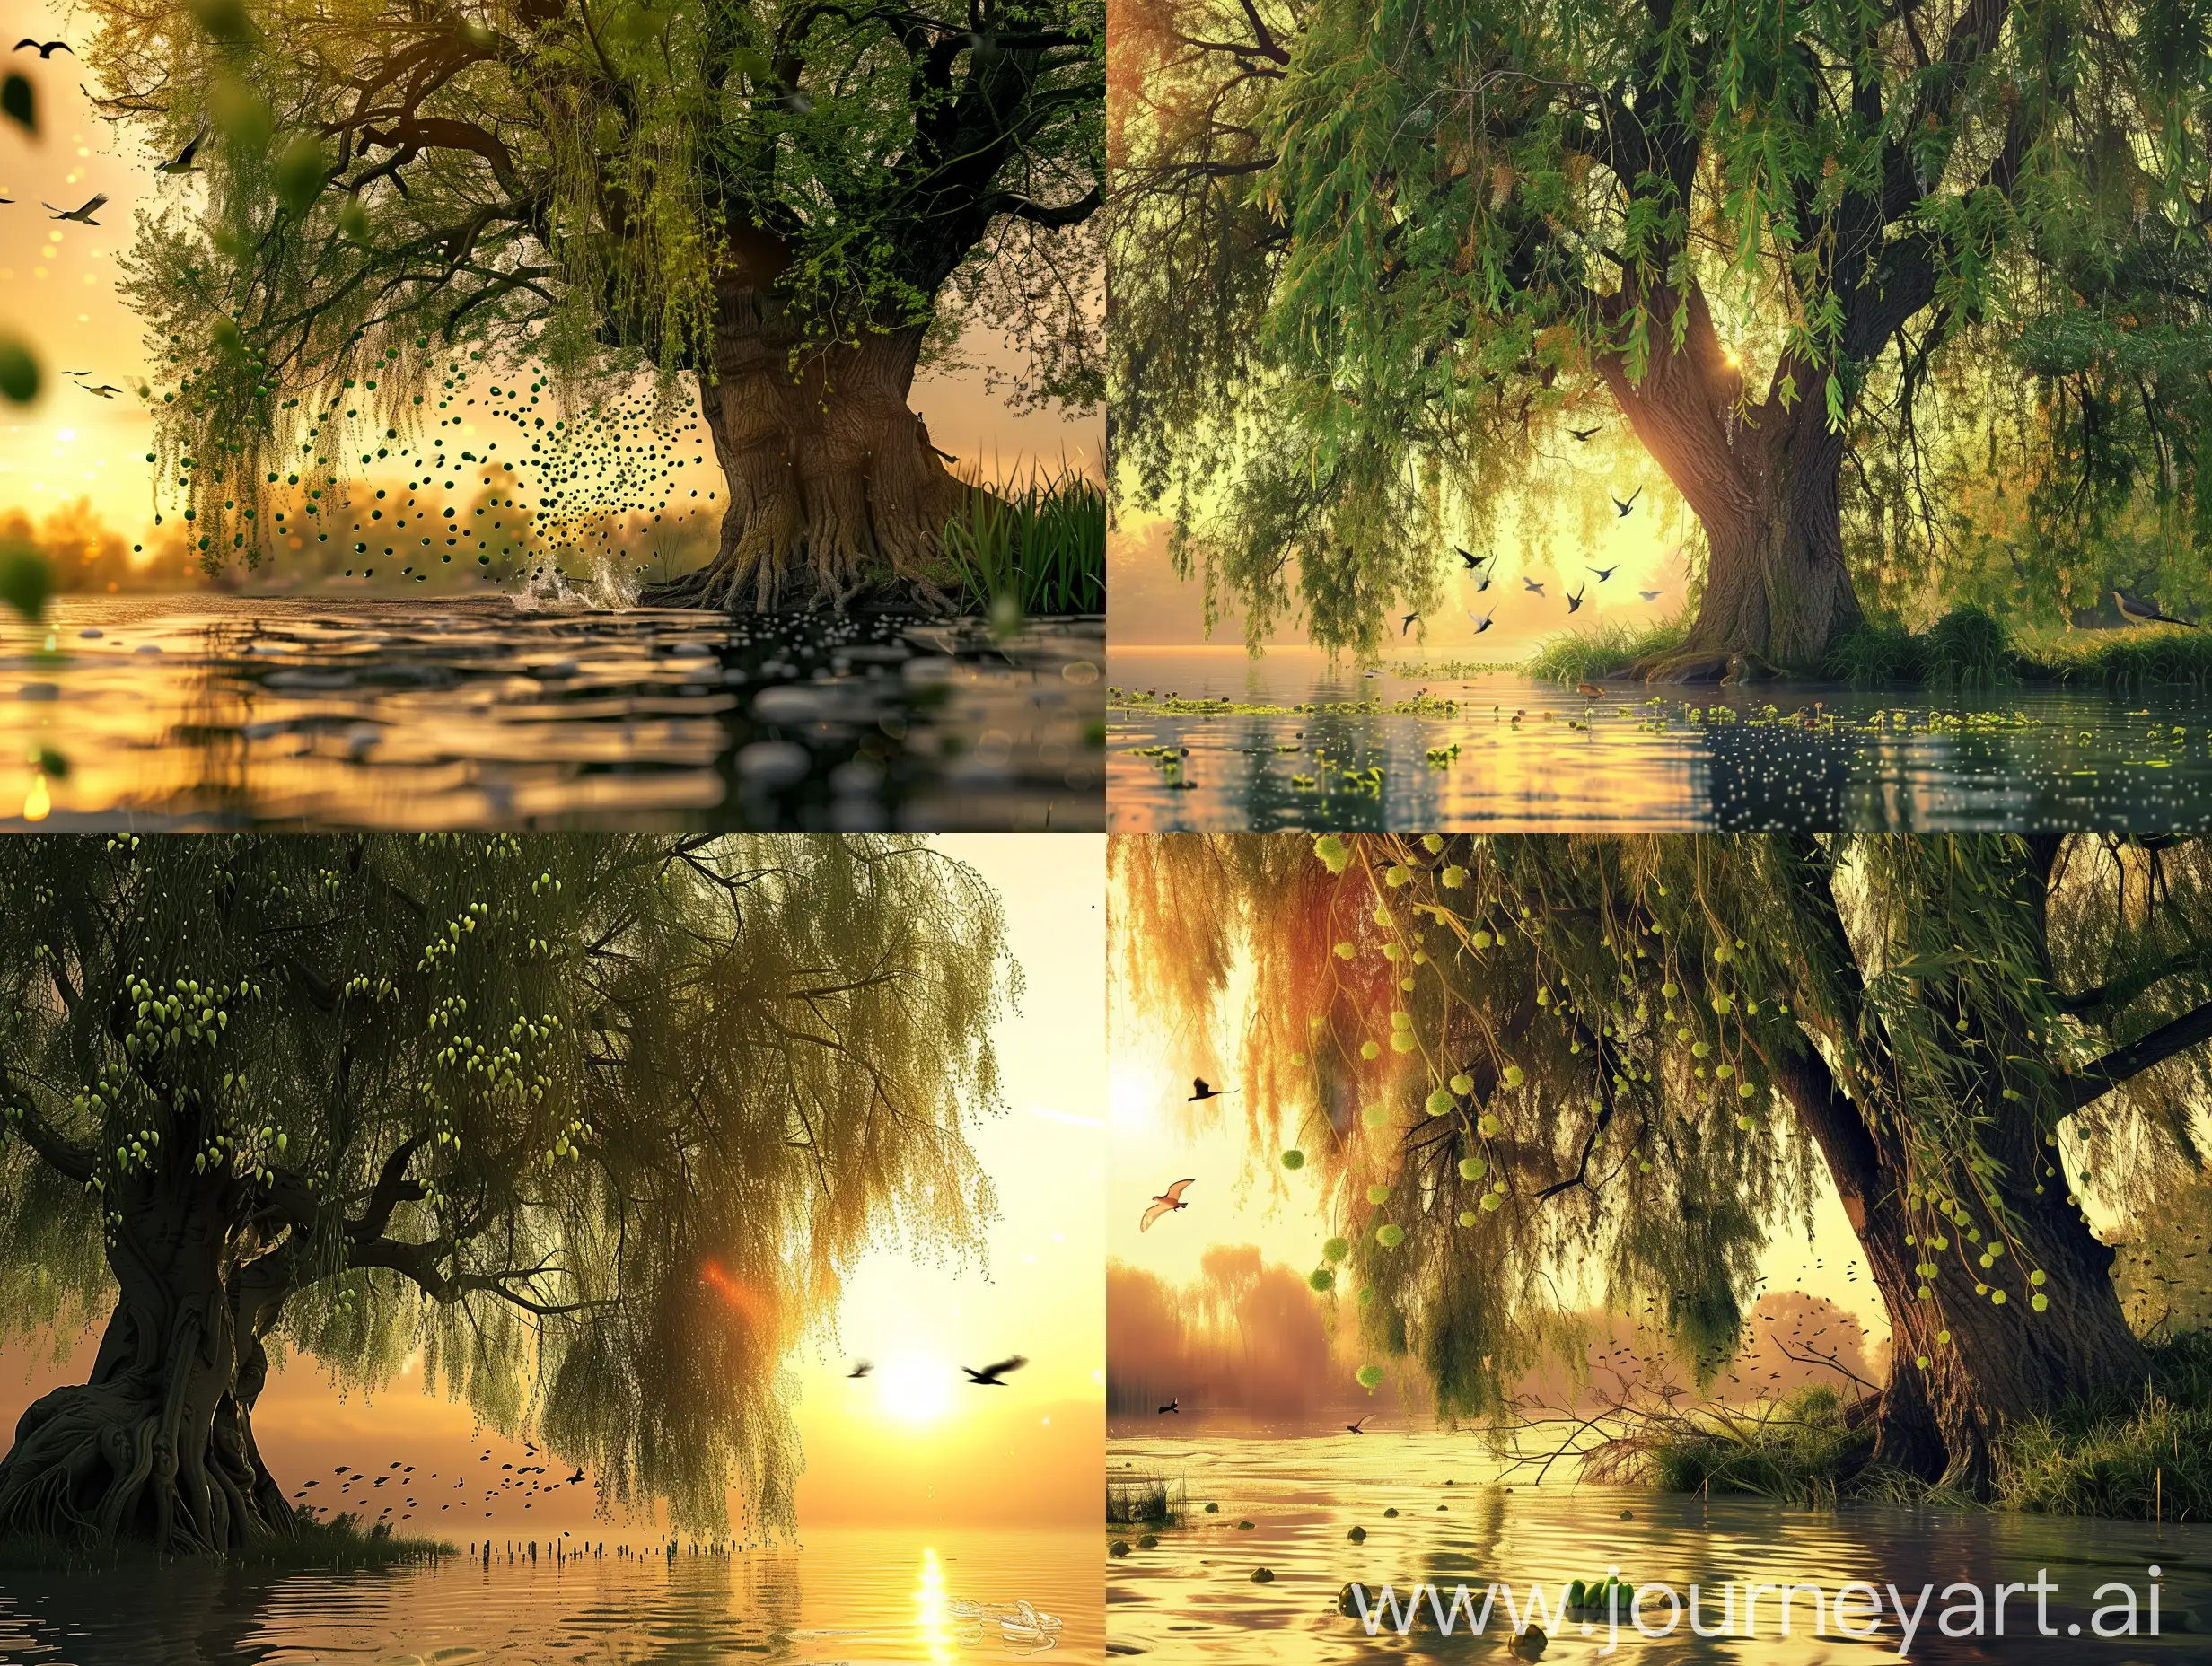 Sunset-Willow-Tree-Riverside-with-Birds-and-Fish